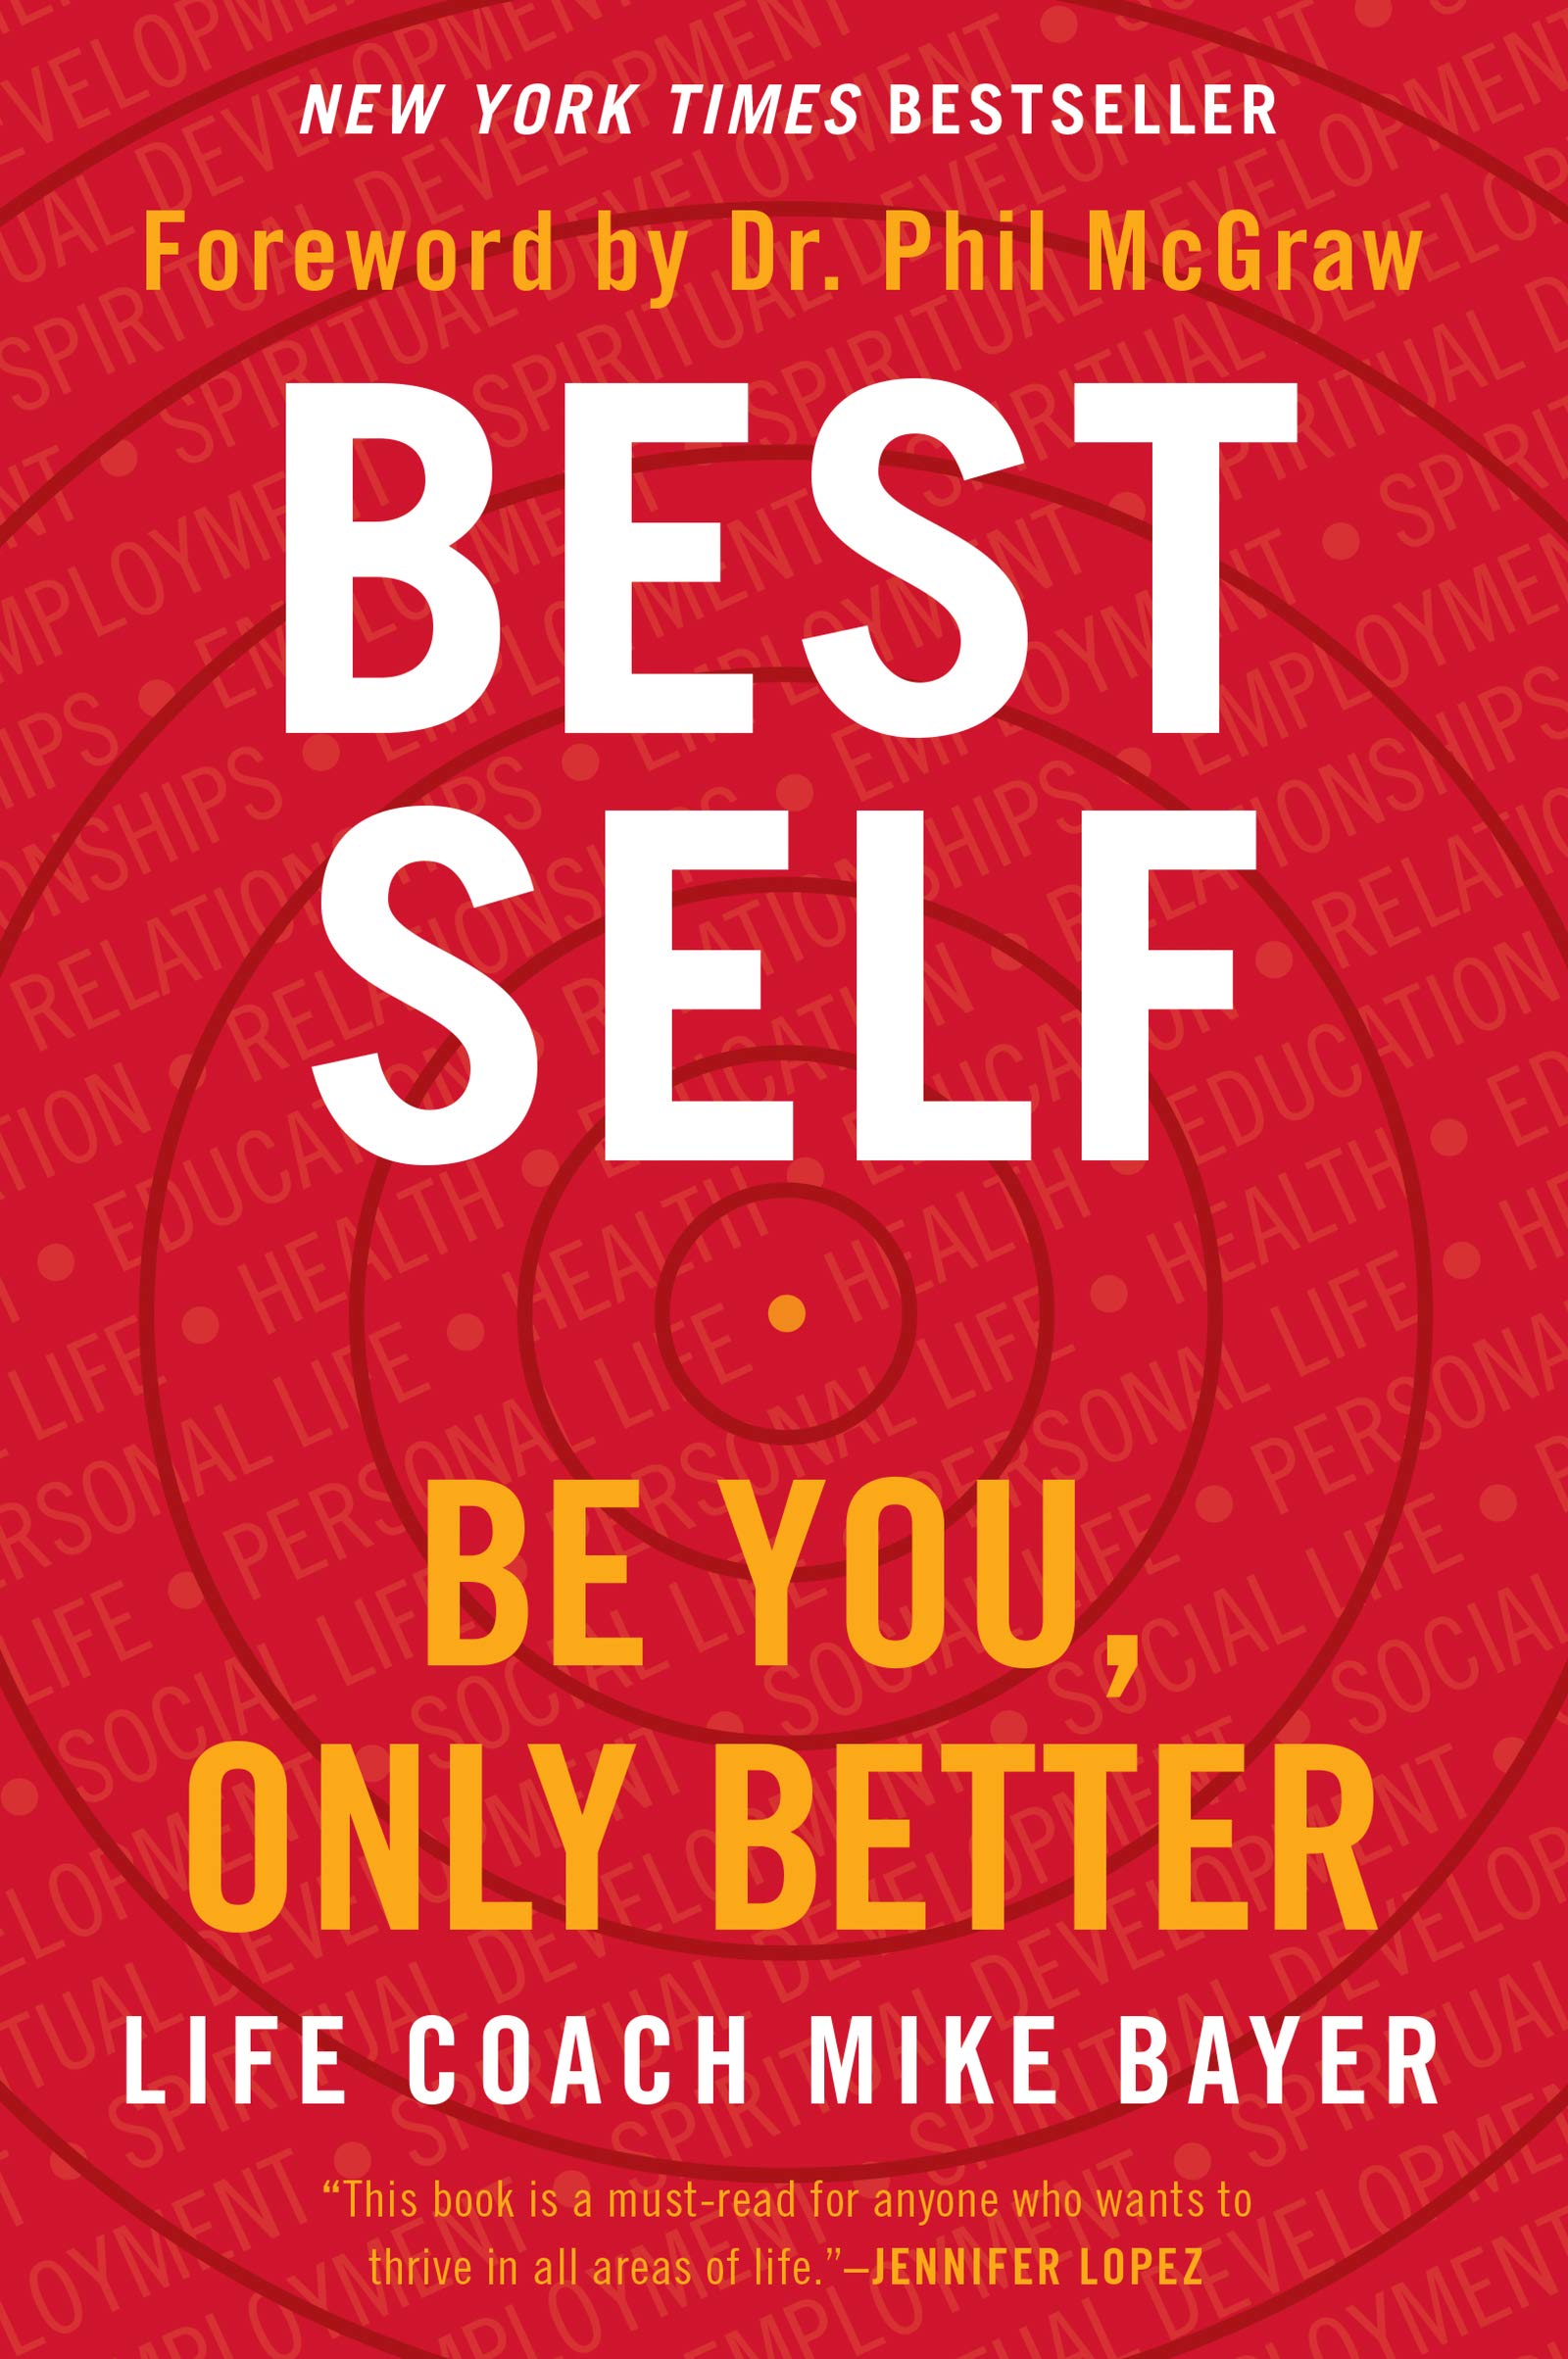 Best Self: Be You, Only Better by Bayer, Mike